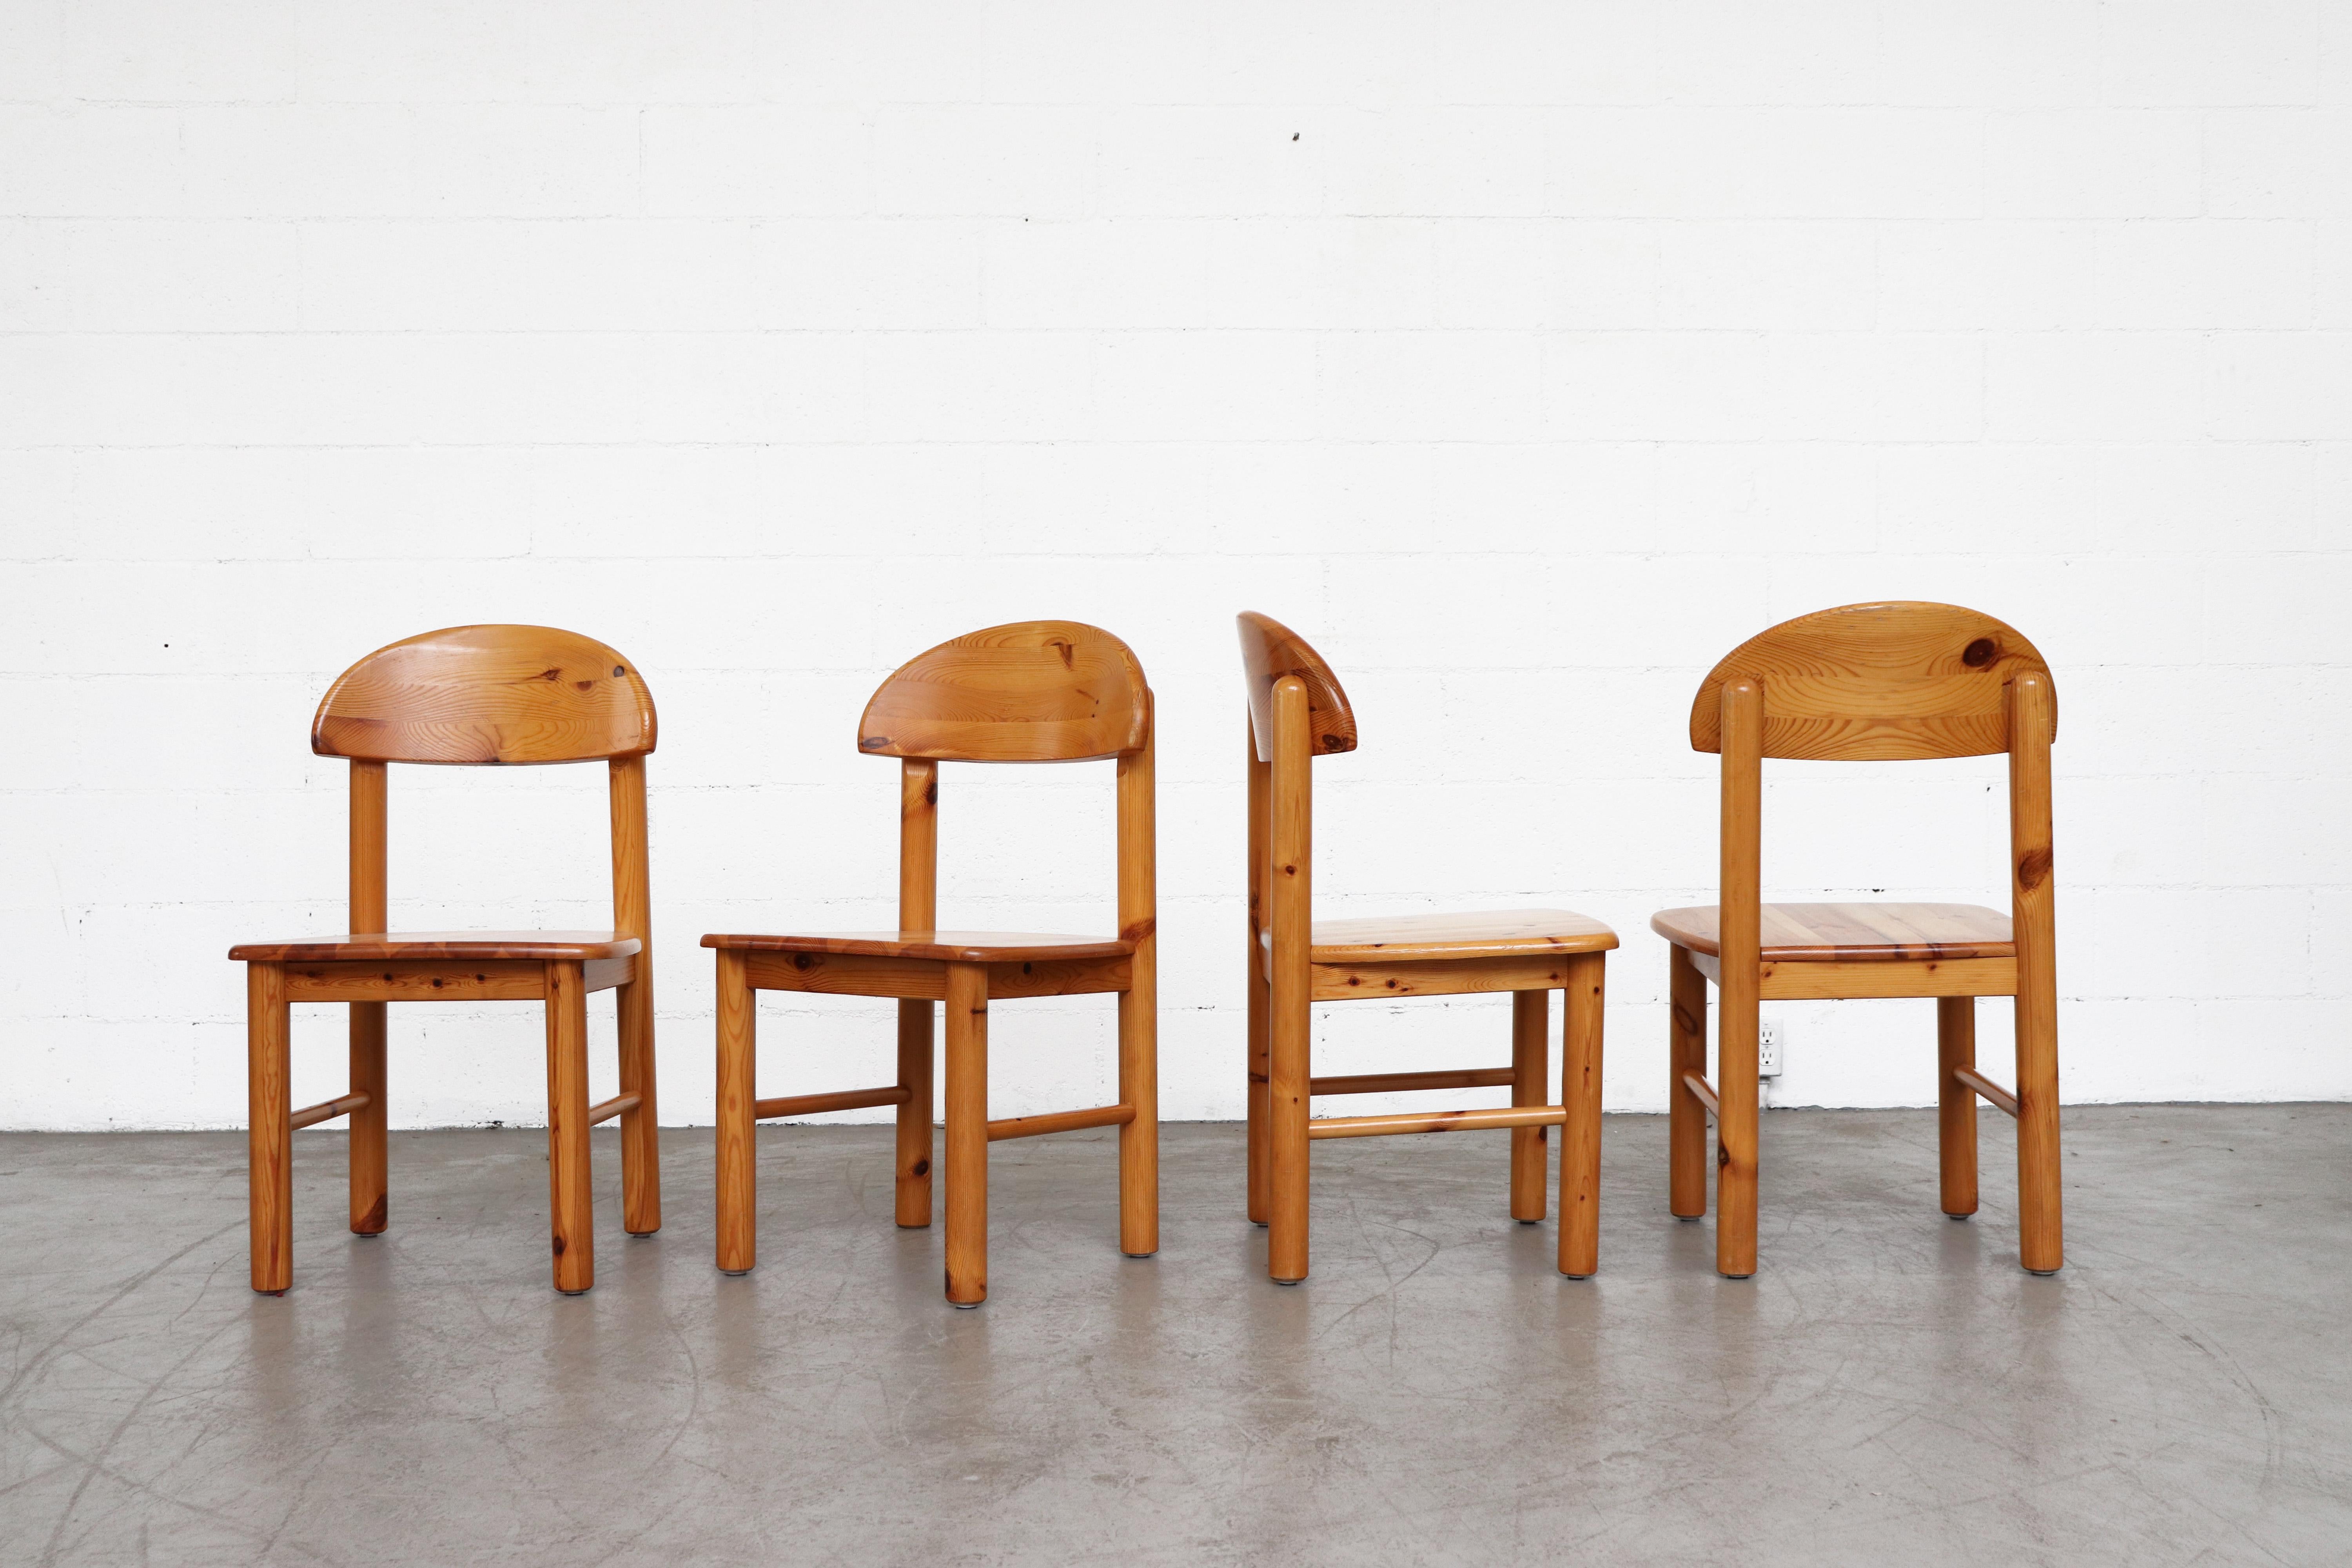 Set of 6 Rainer Daumiller style pine dining chairs with two armchairs and four side chairs. In original condition with signs of wear consistent with their age and use. Other similar sets available and listed separately.
Side chairs measure: 19.5 W